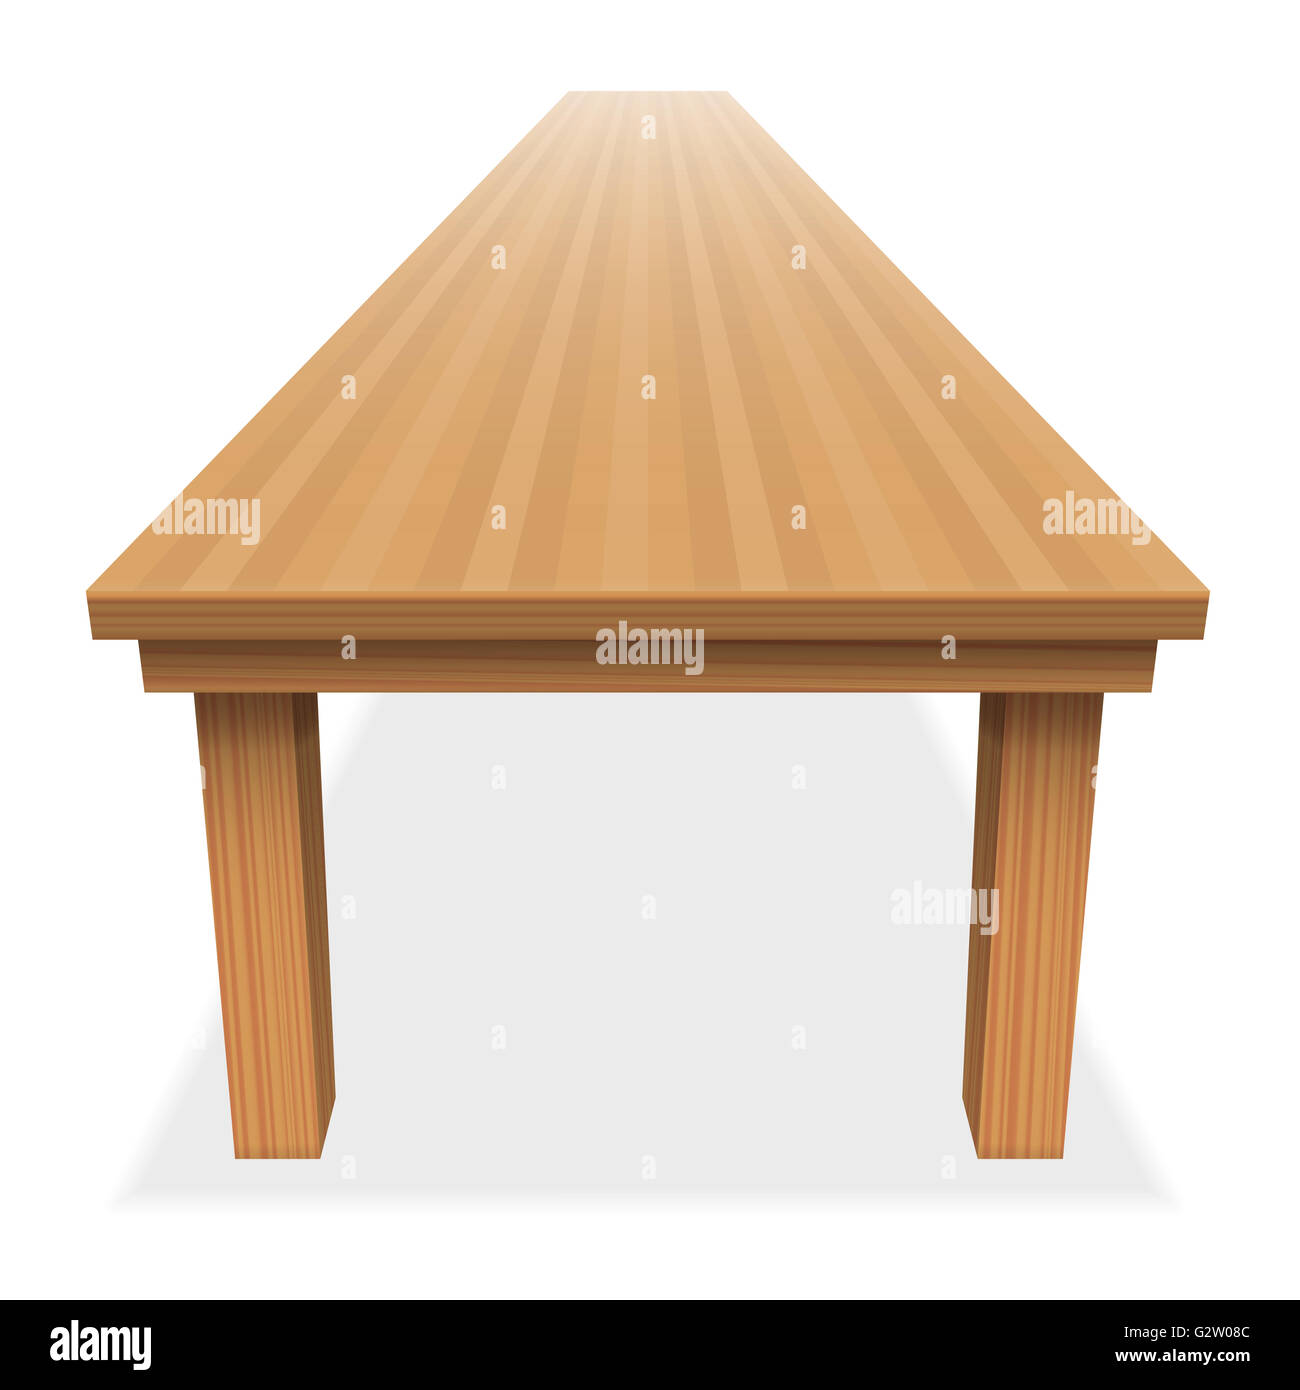 Very long empty wood table - for festive banquet or the like - perspective view from above -  illustration on white background. Stock Photo